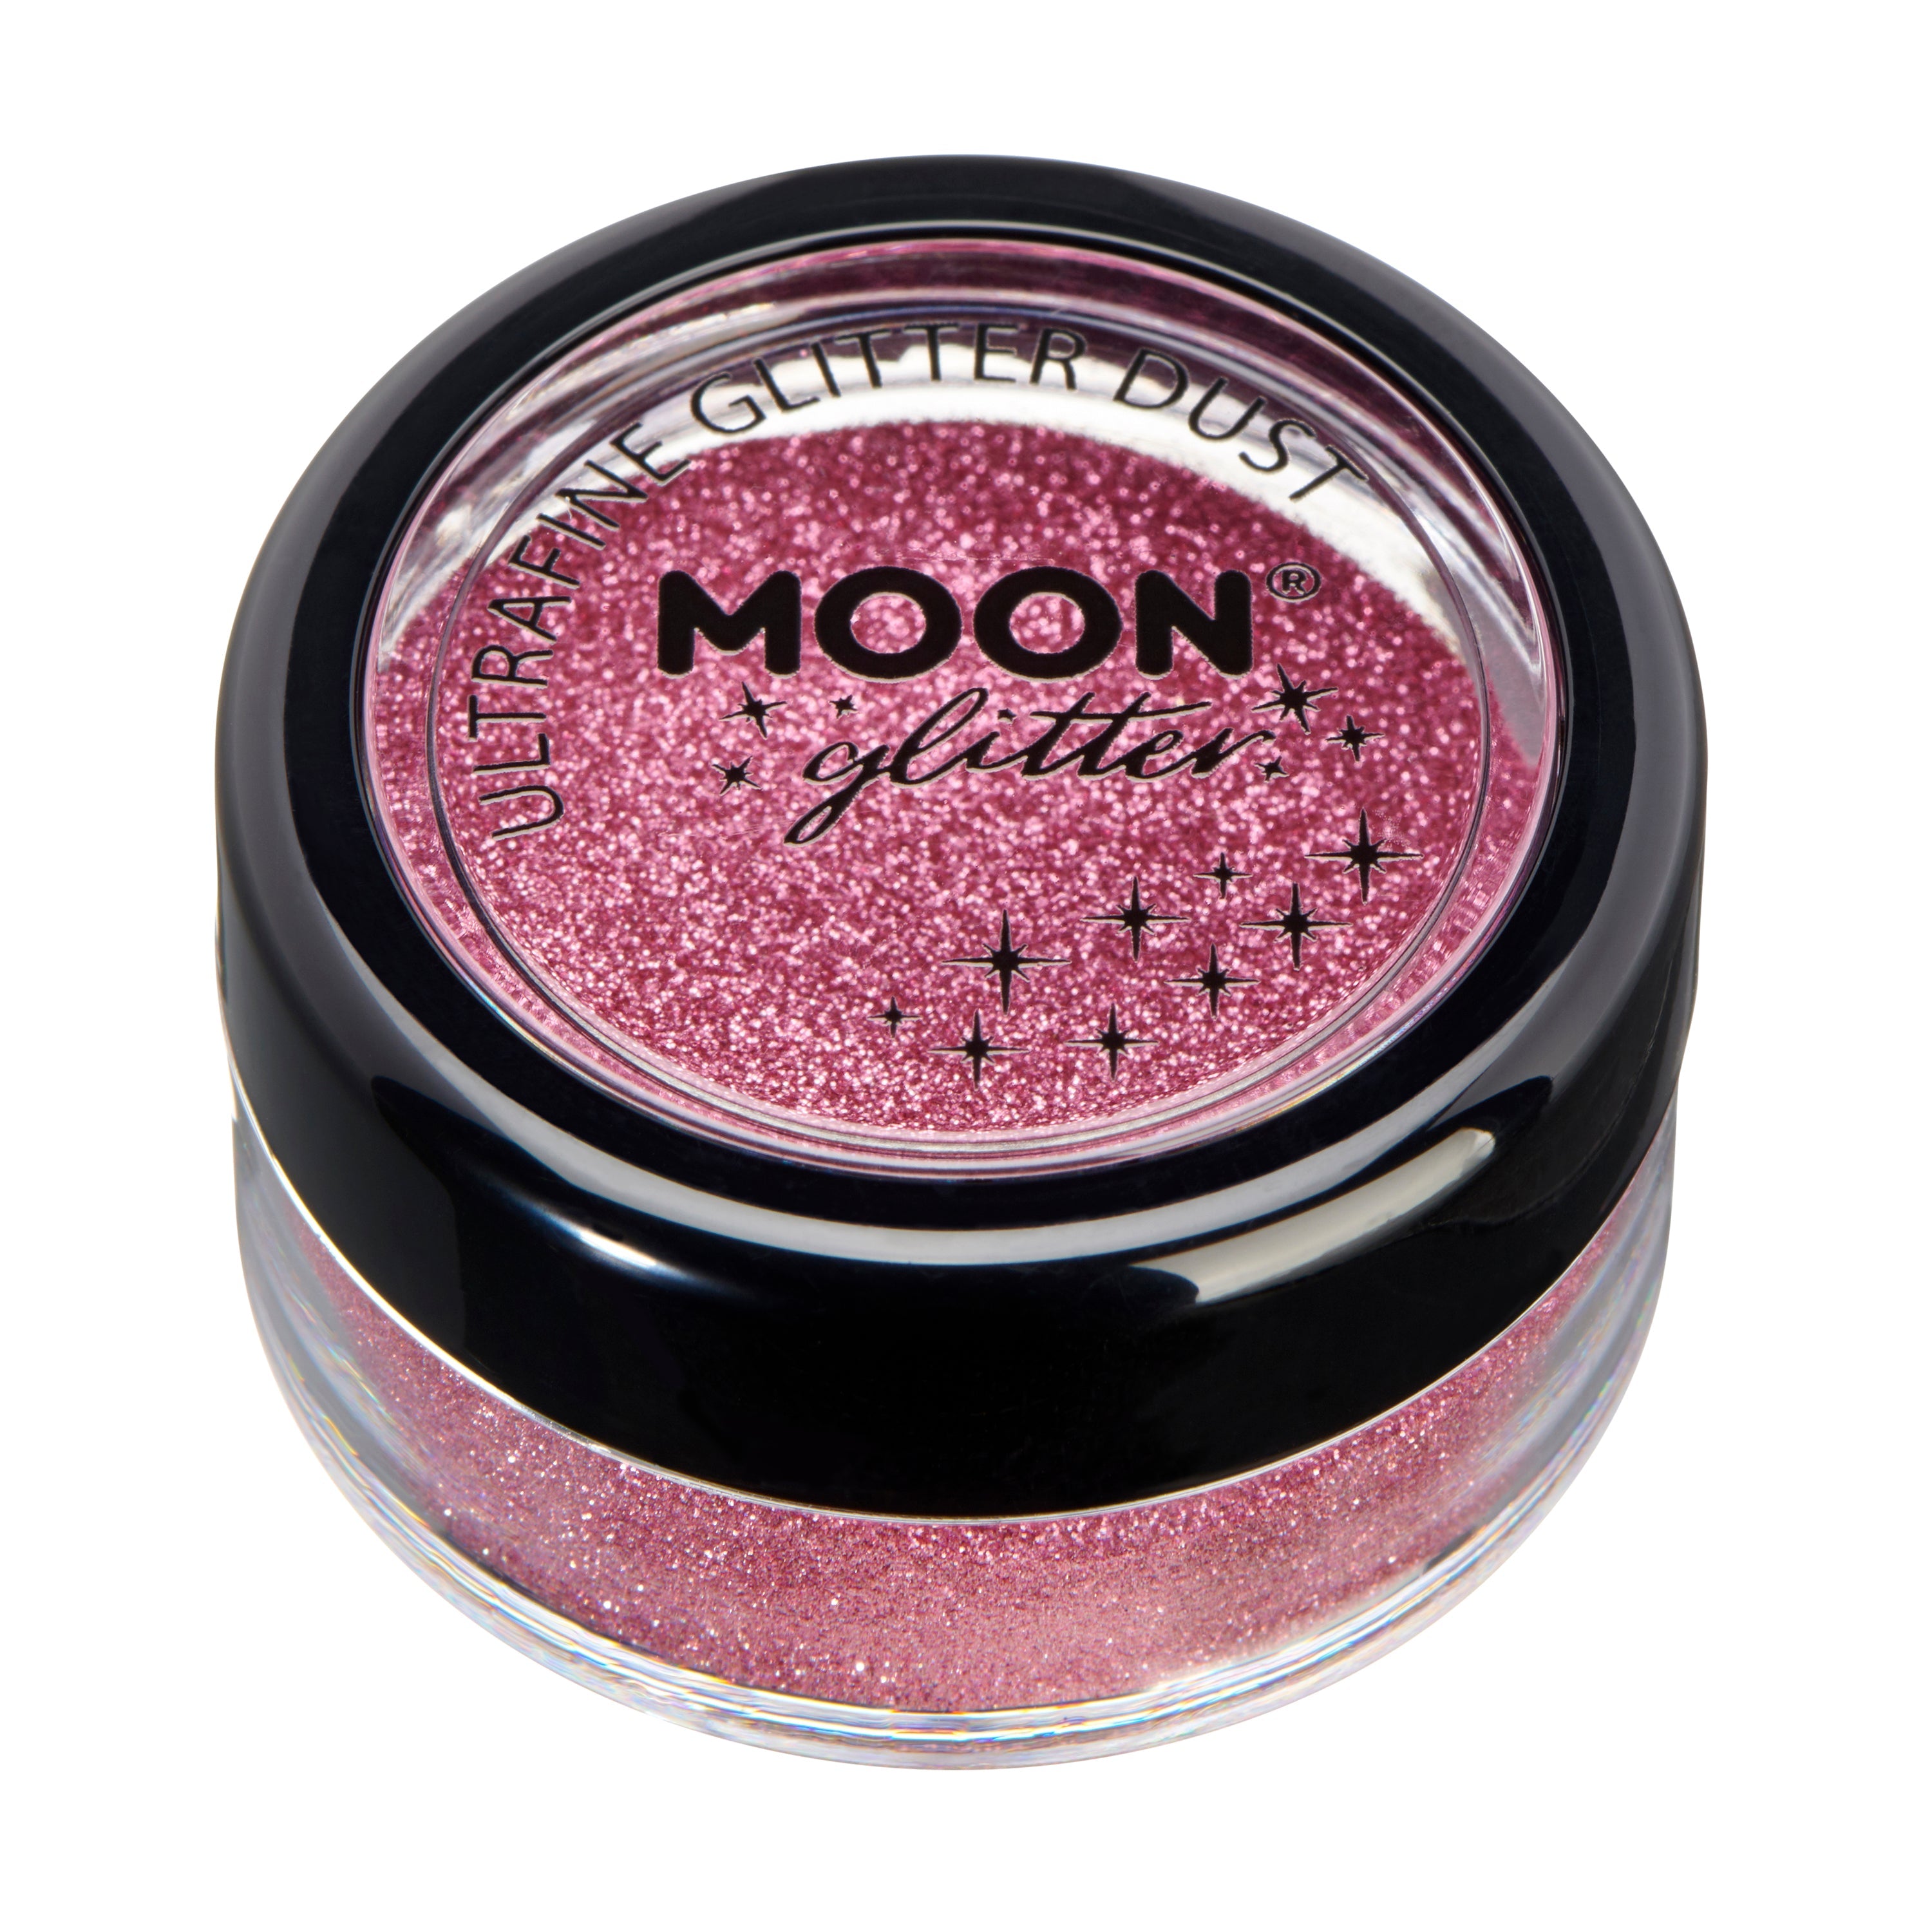 Pink - Classic Ultrafine Face & Body Glitter Dust, 5g. Cosmetically certified, FDA & Health Canada compliant, cruelty free and vegan.